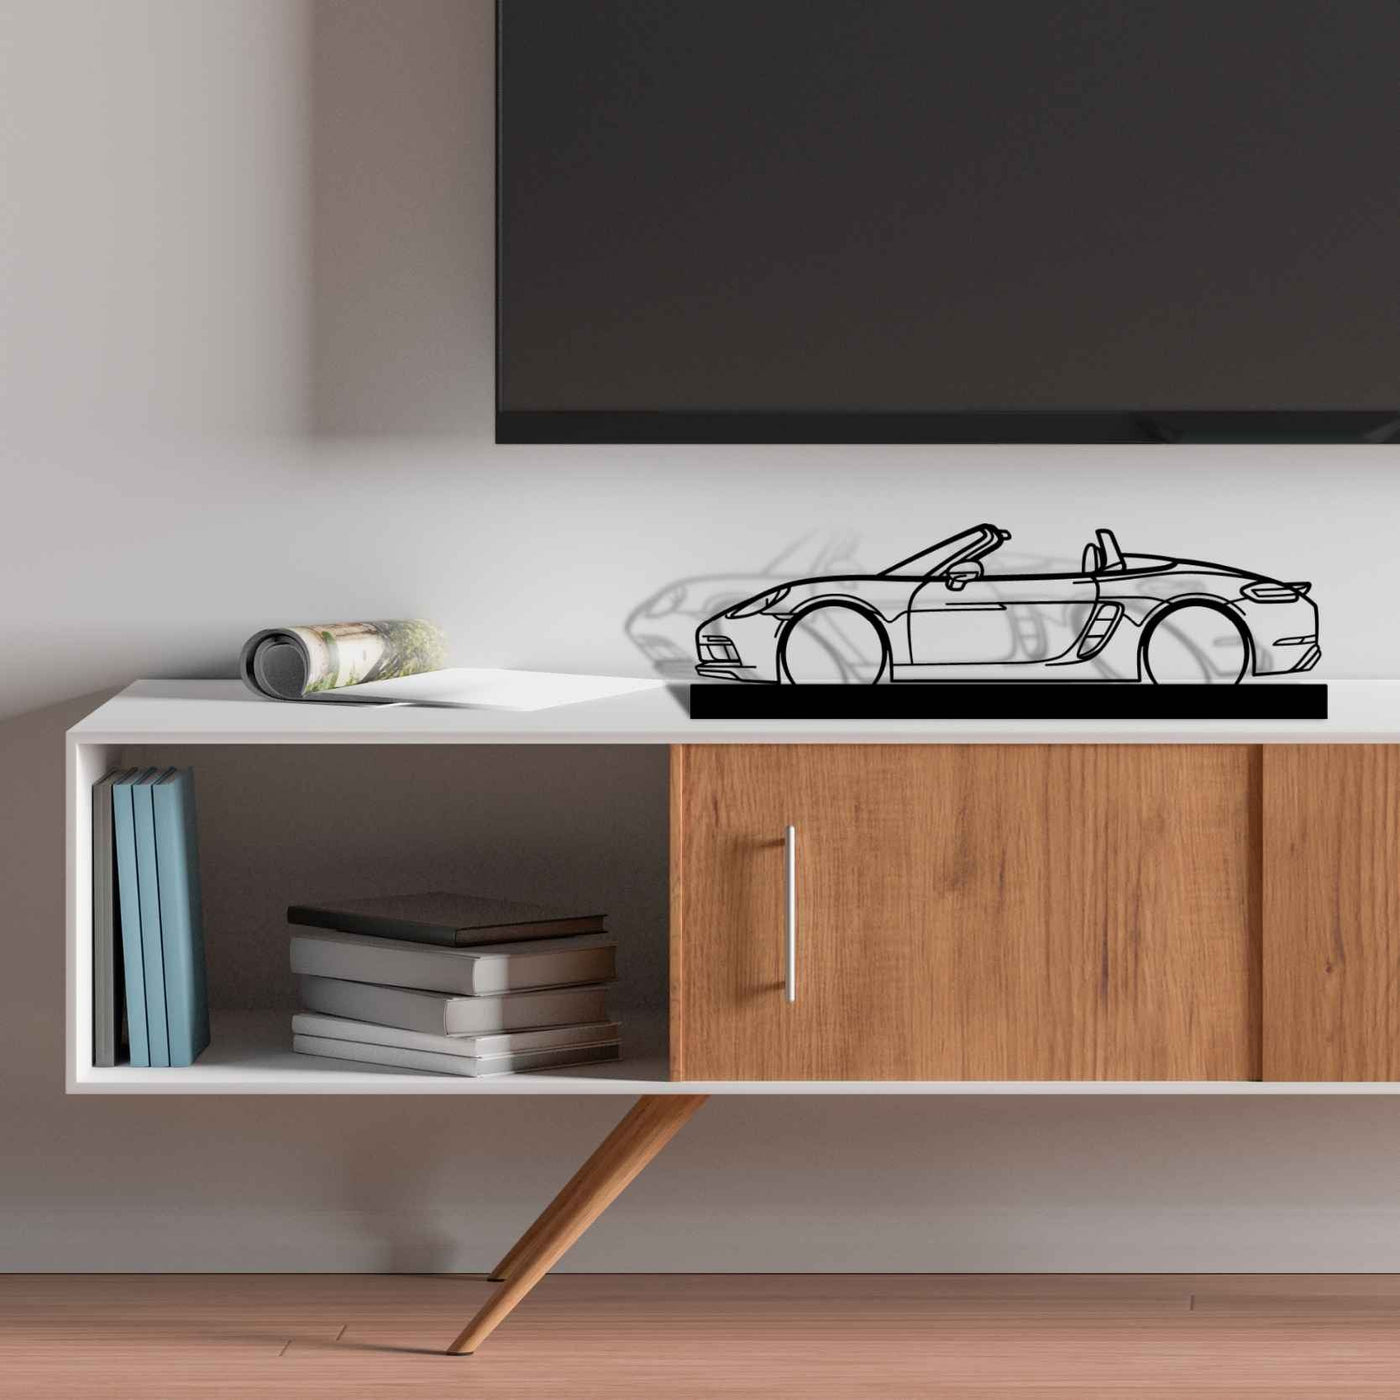 718 Boxster GTS Silhouette Metal Art Stand